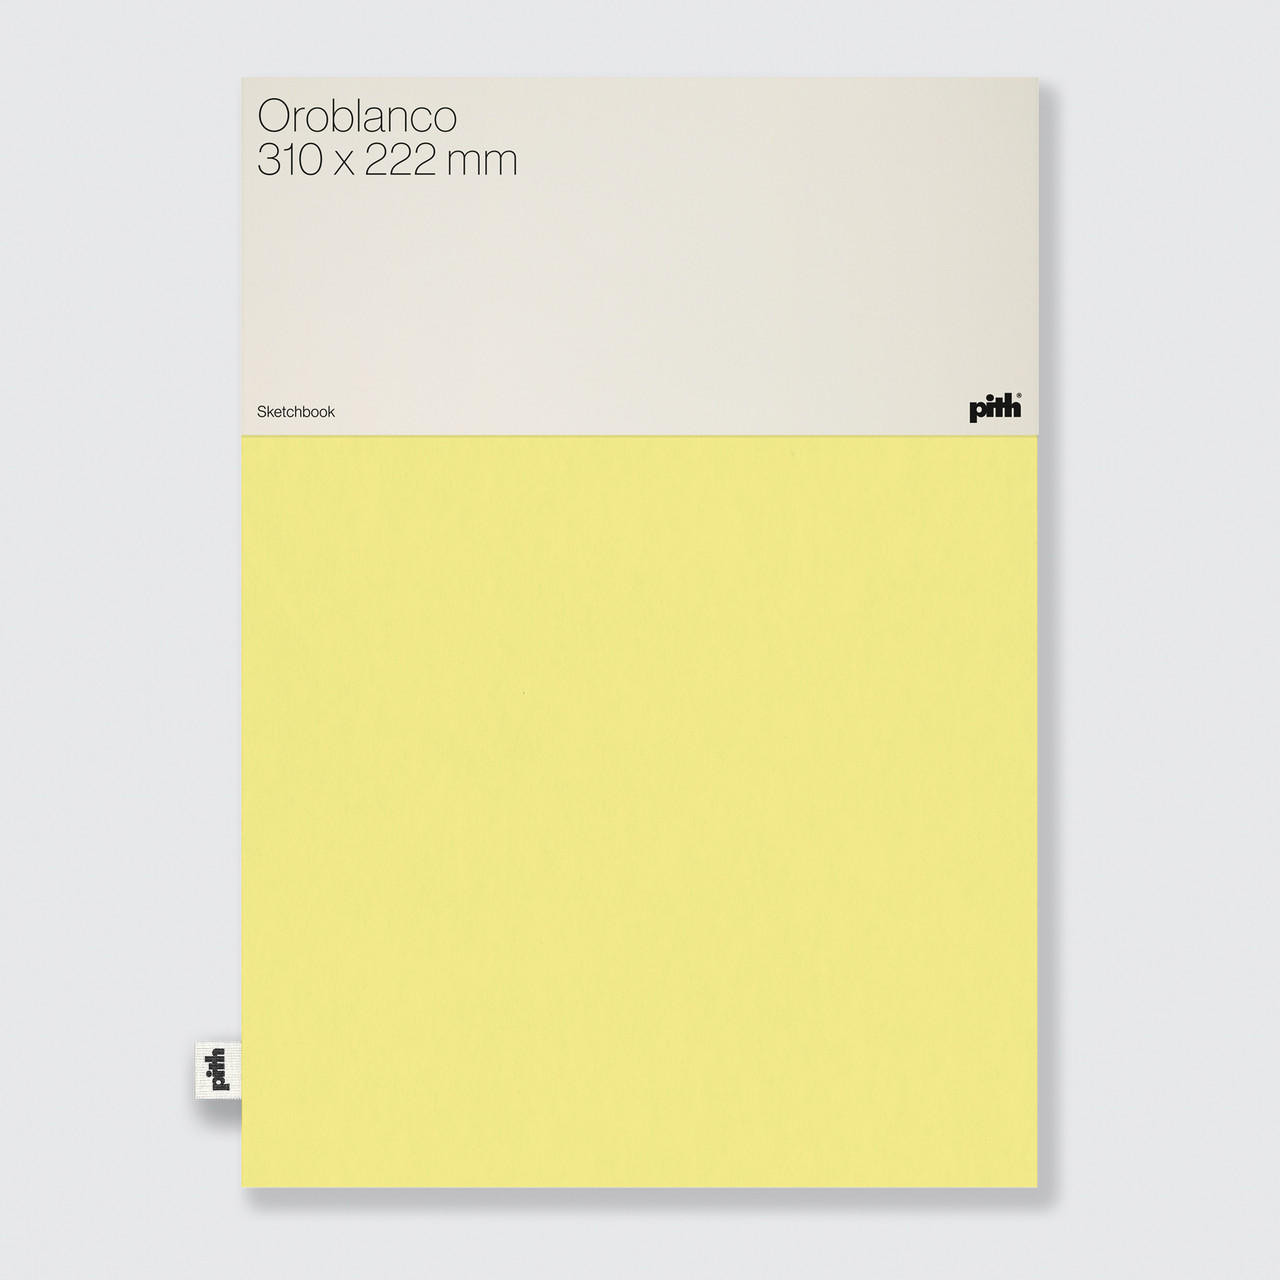 Pith Oroblanco Sketchbook 200gsm 76 Pages 310 x 222mm Yellow - Cass Art Exclusive